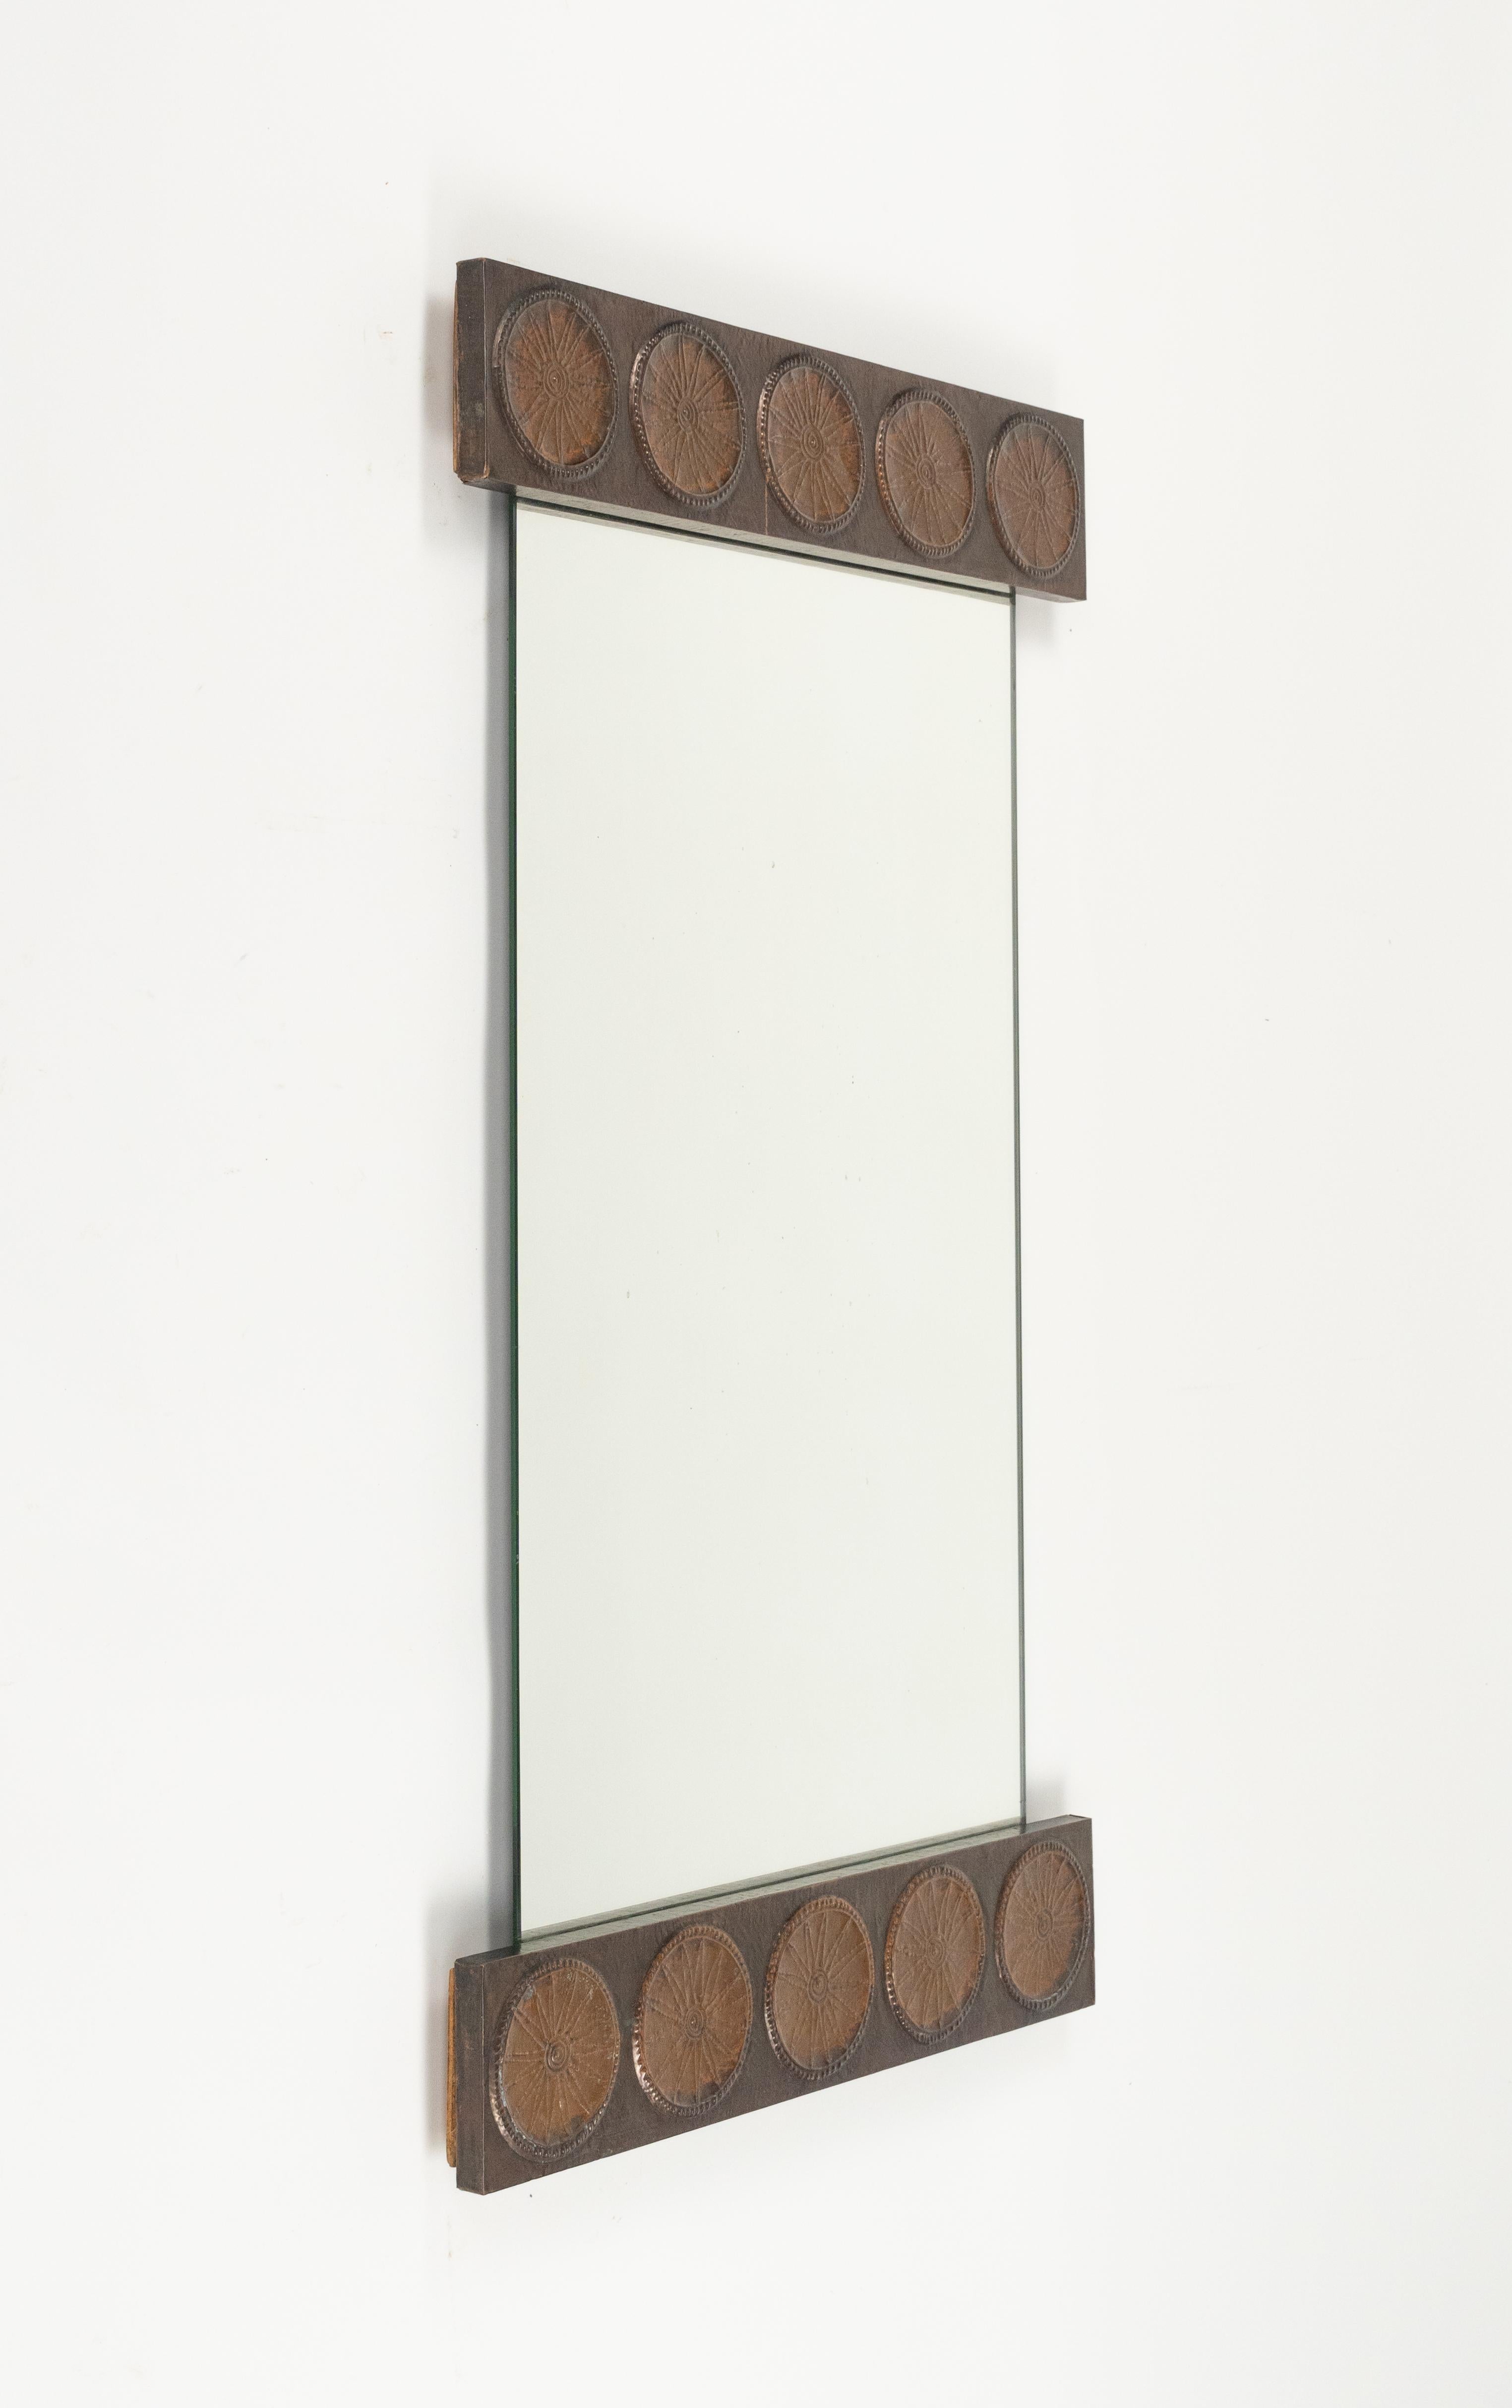 Midcentury amazing rectangular wall mirror in embossed copper decoration on the upper and lower part by Santambrogio & De Berti.  

Made in Italy in the 1960s.  

The original label is still attached on the back, as shown in the pictures.